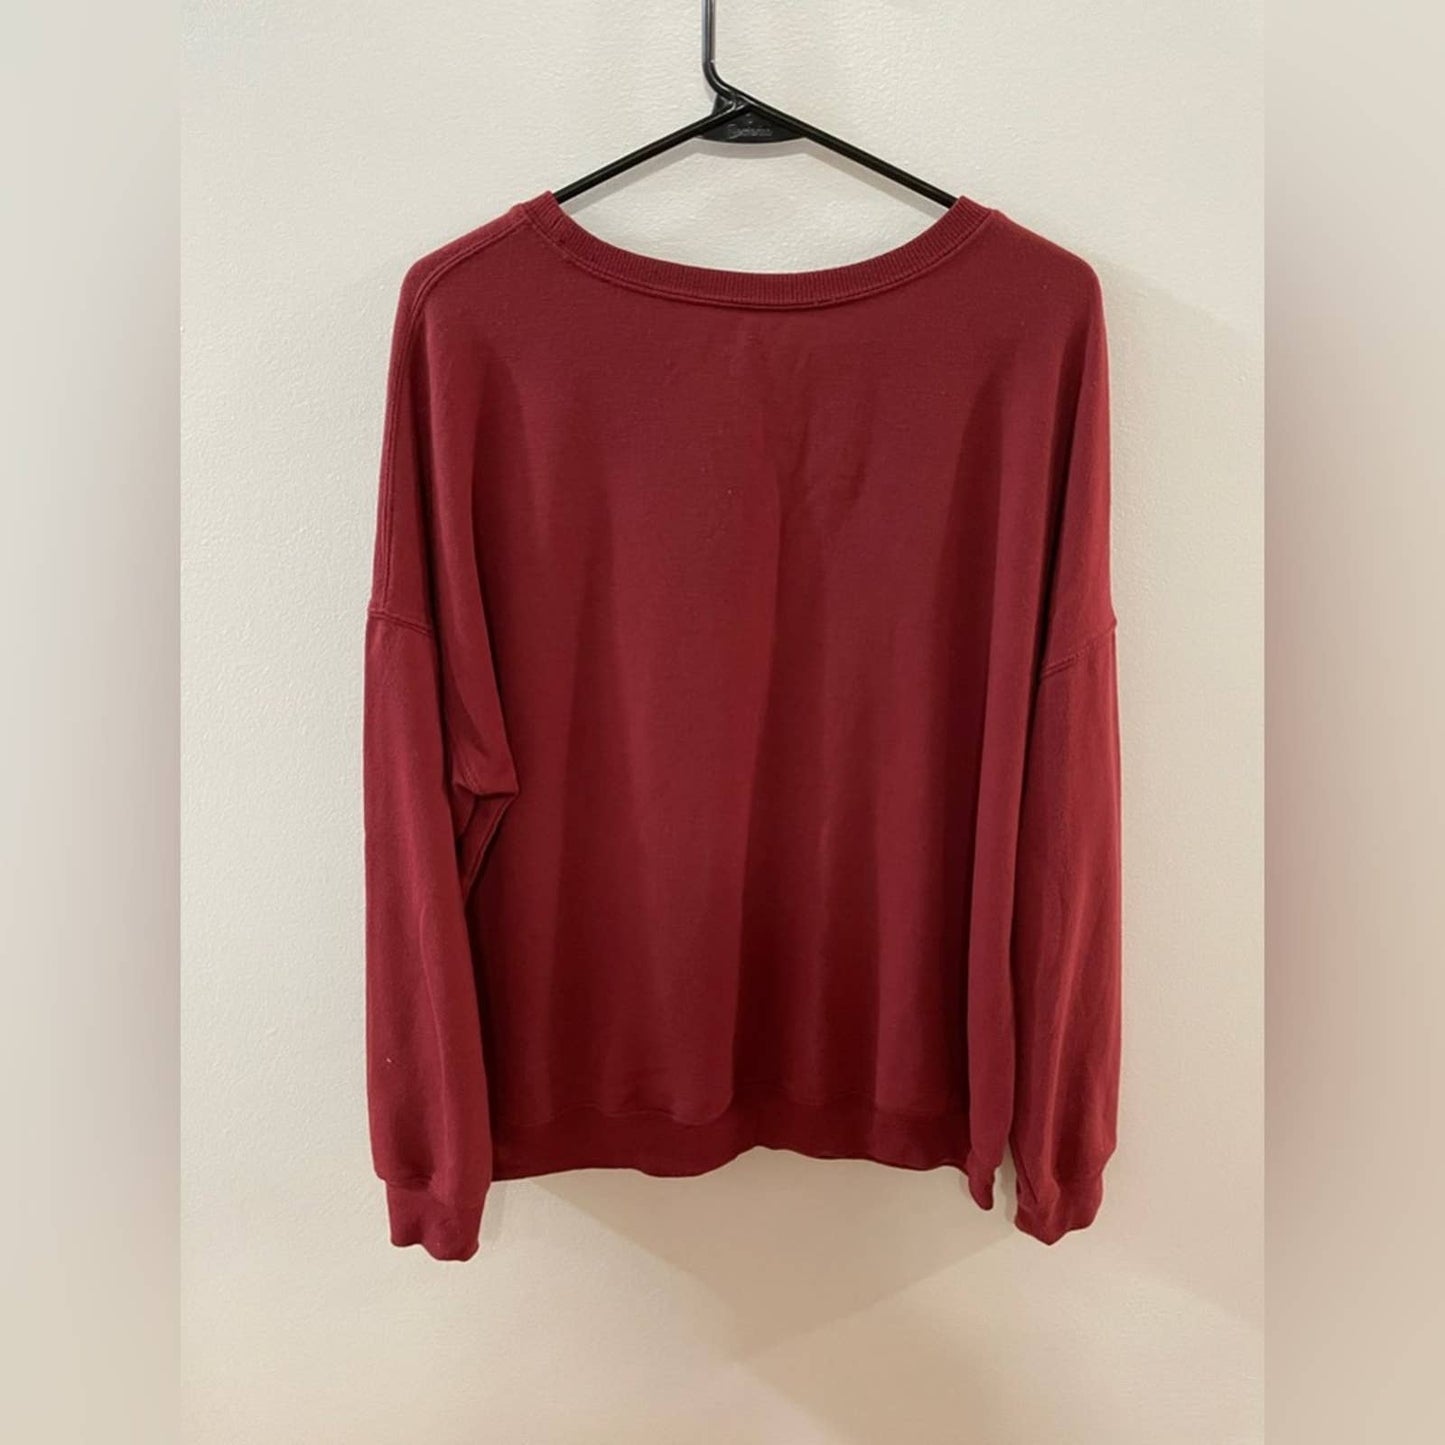 LG Coca-Cola Red Long Sleeve